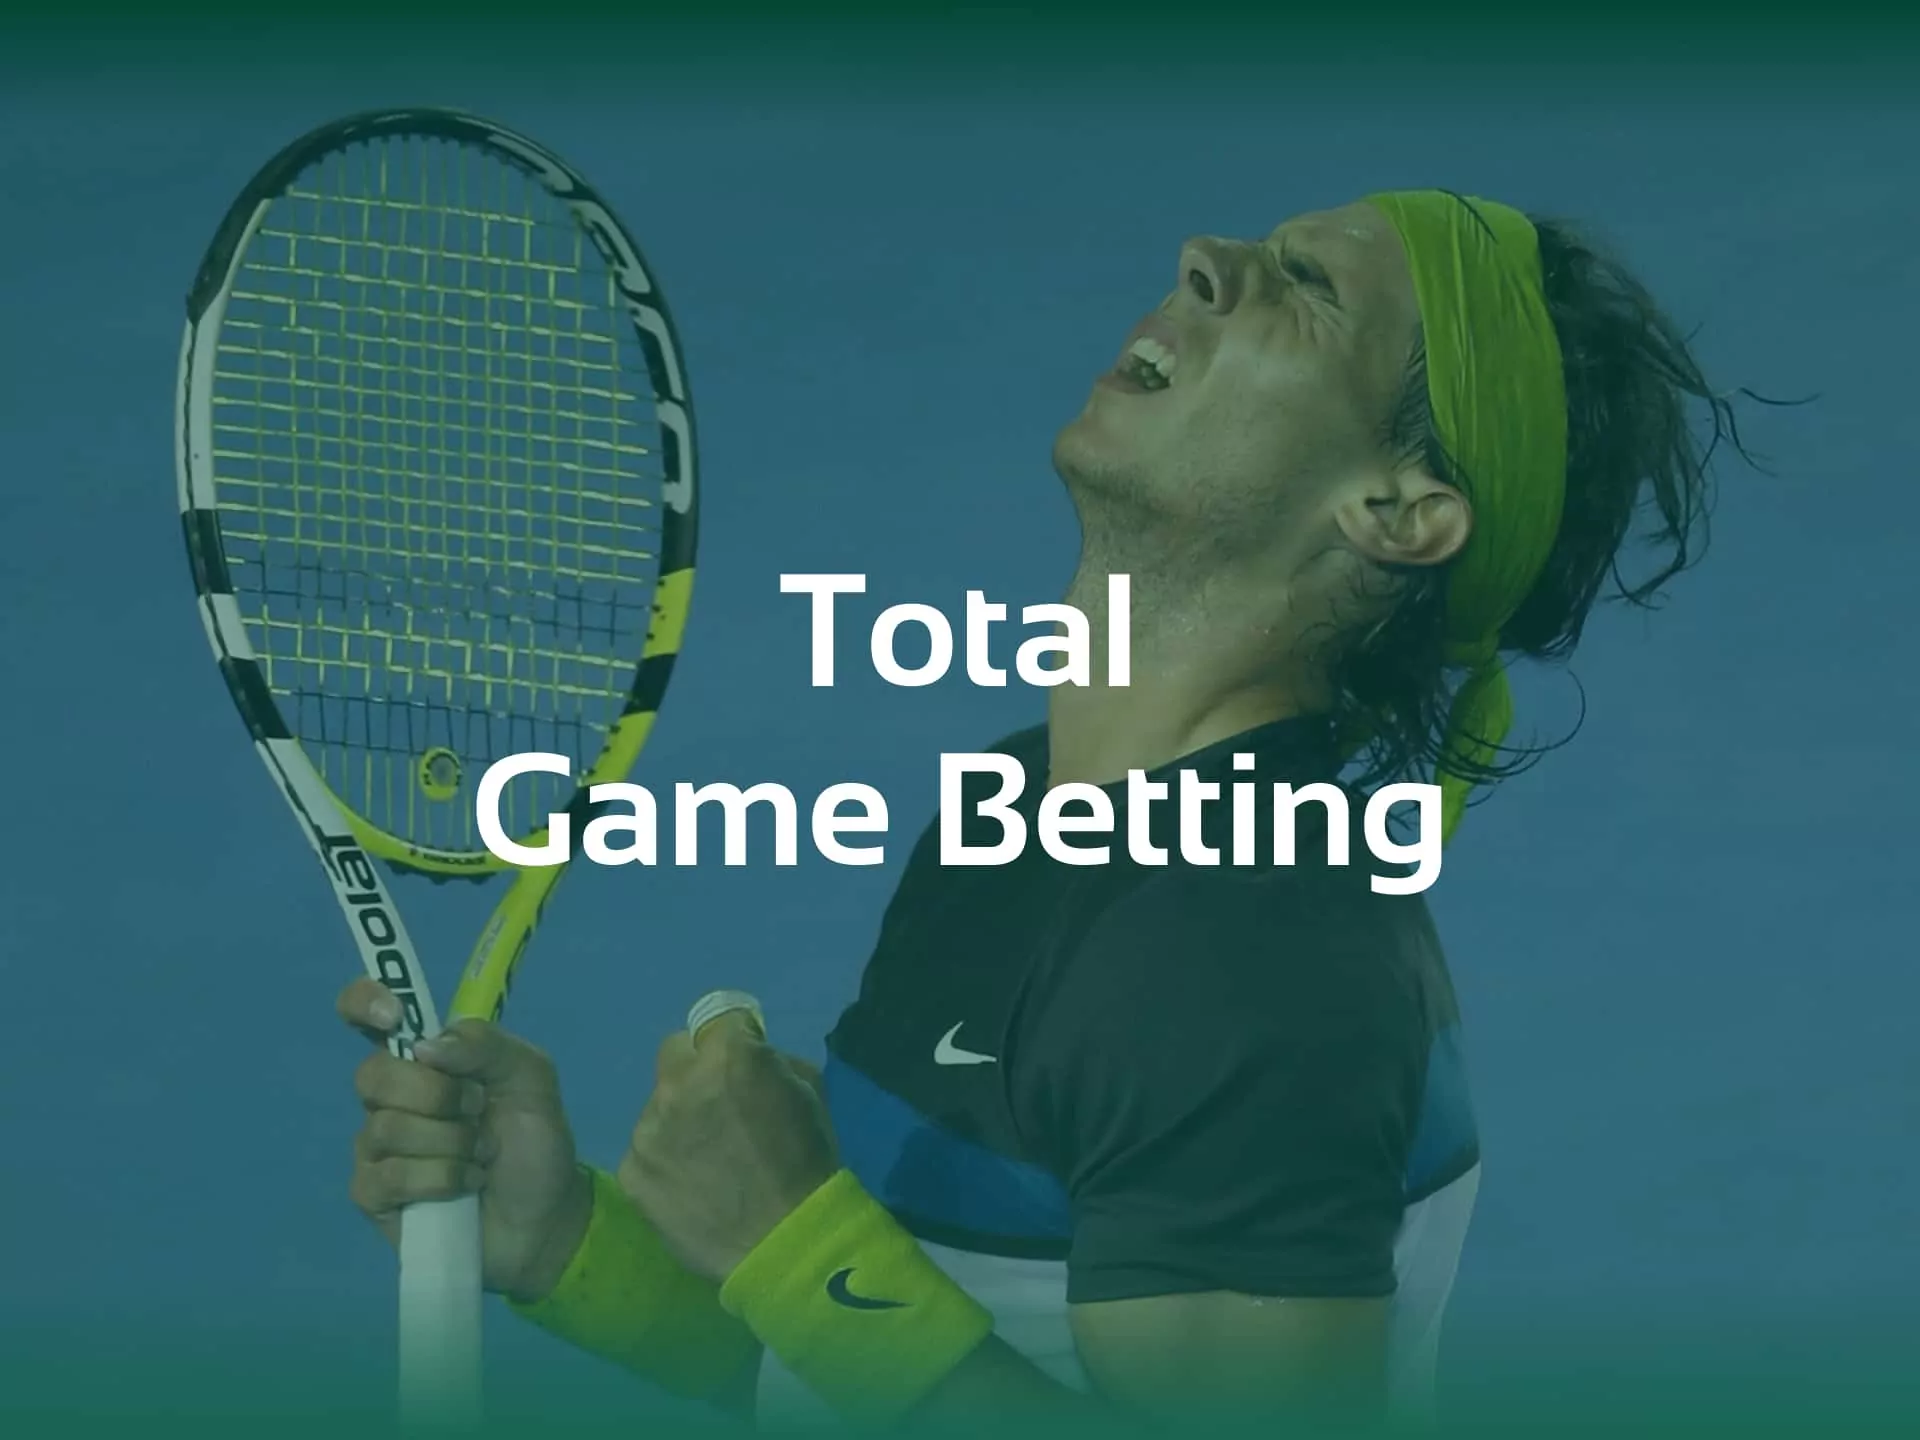 Total Game Betting on tennis betting sites.